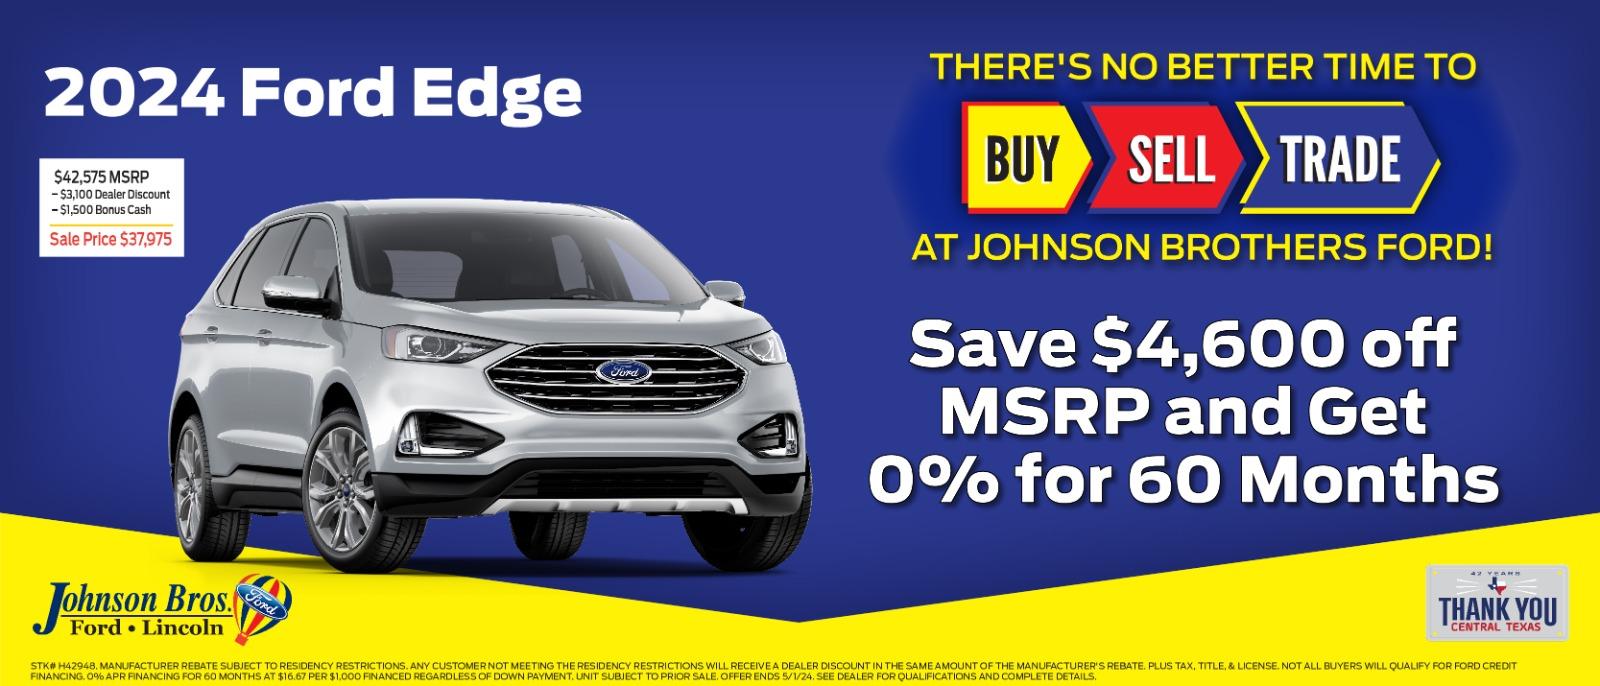 2024 Ford Edge

Save $4,600 off MSRP and get 0% for 60 months